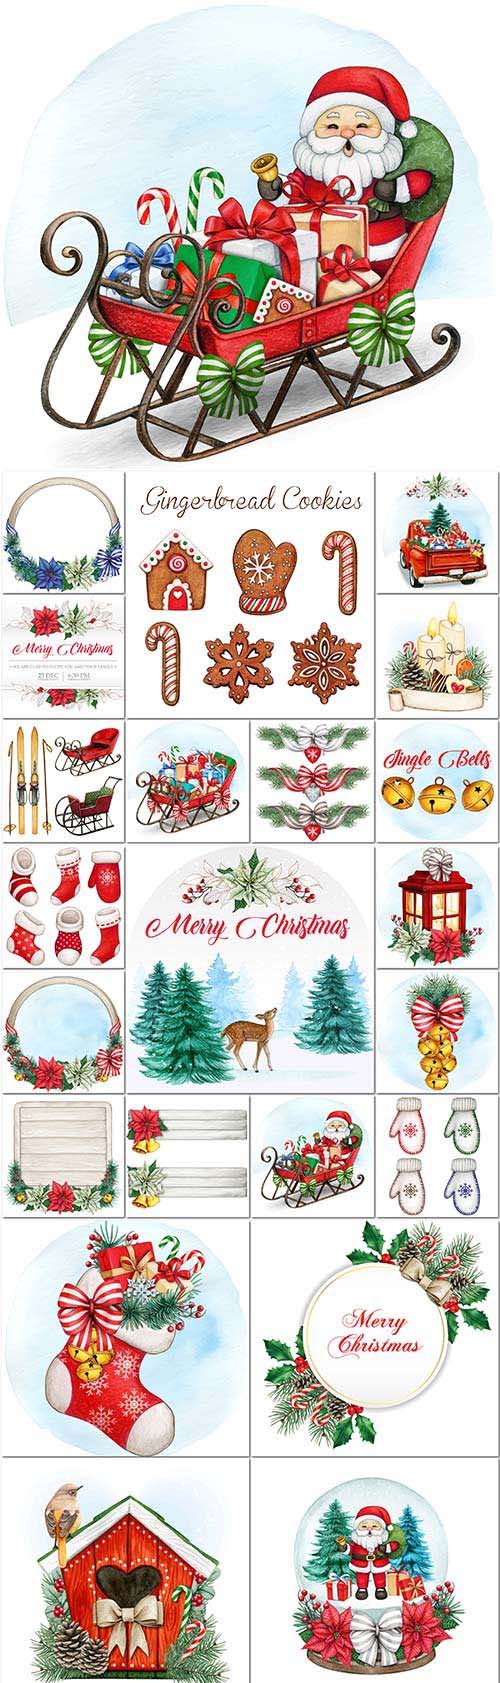 Santa claus and christmas decorations, new year elements in vector